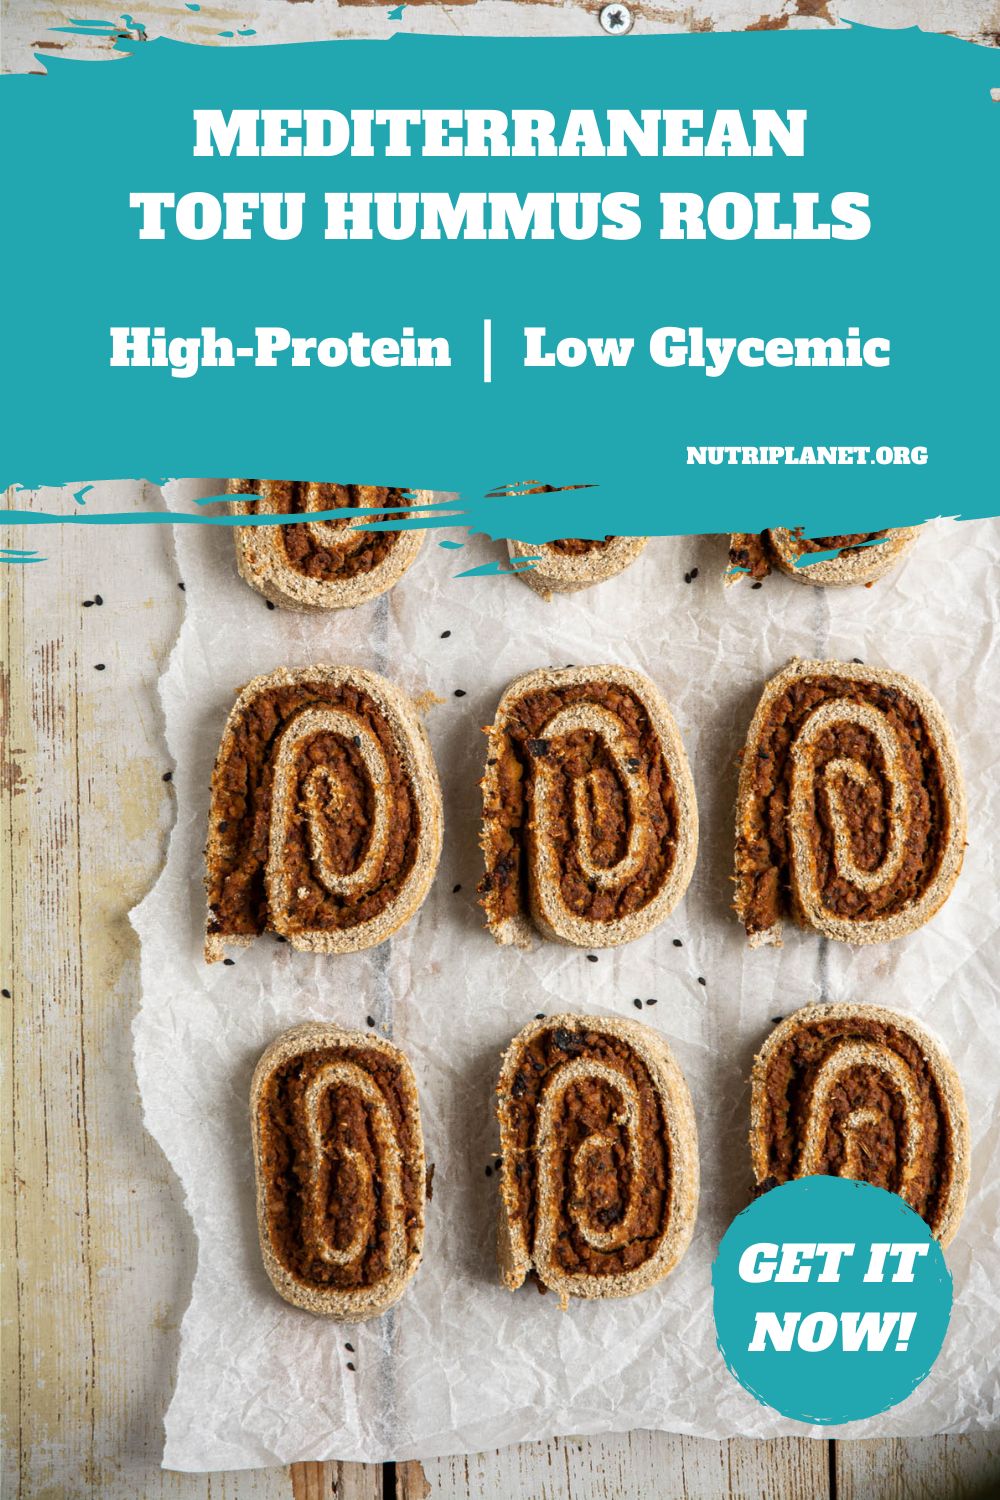 Savoury Mediterranean flavoured rolls for a healthy and low glycemic snack.